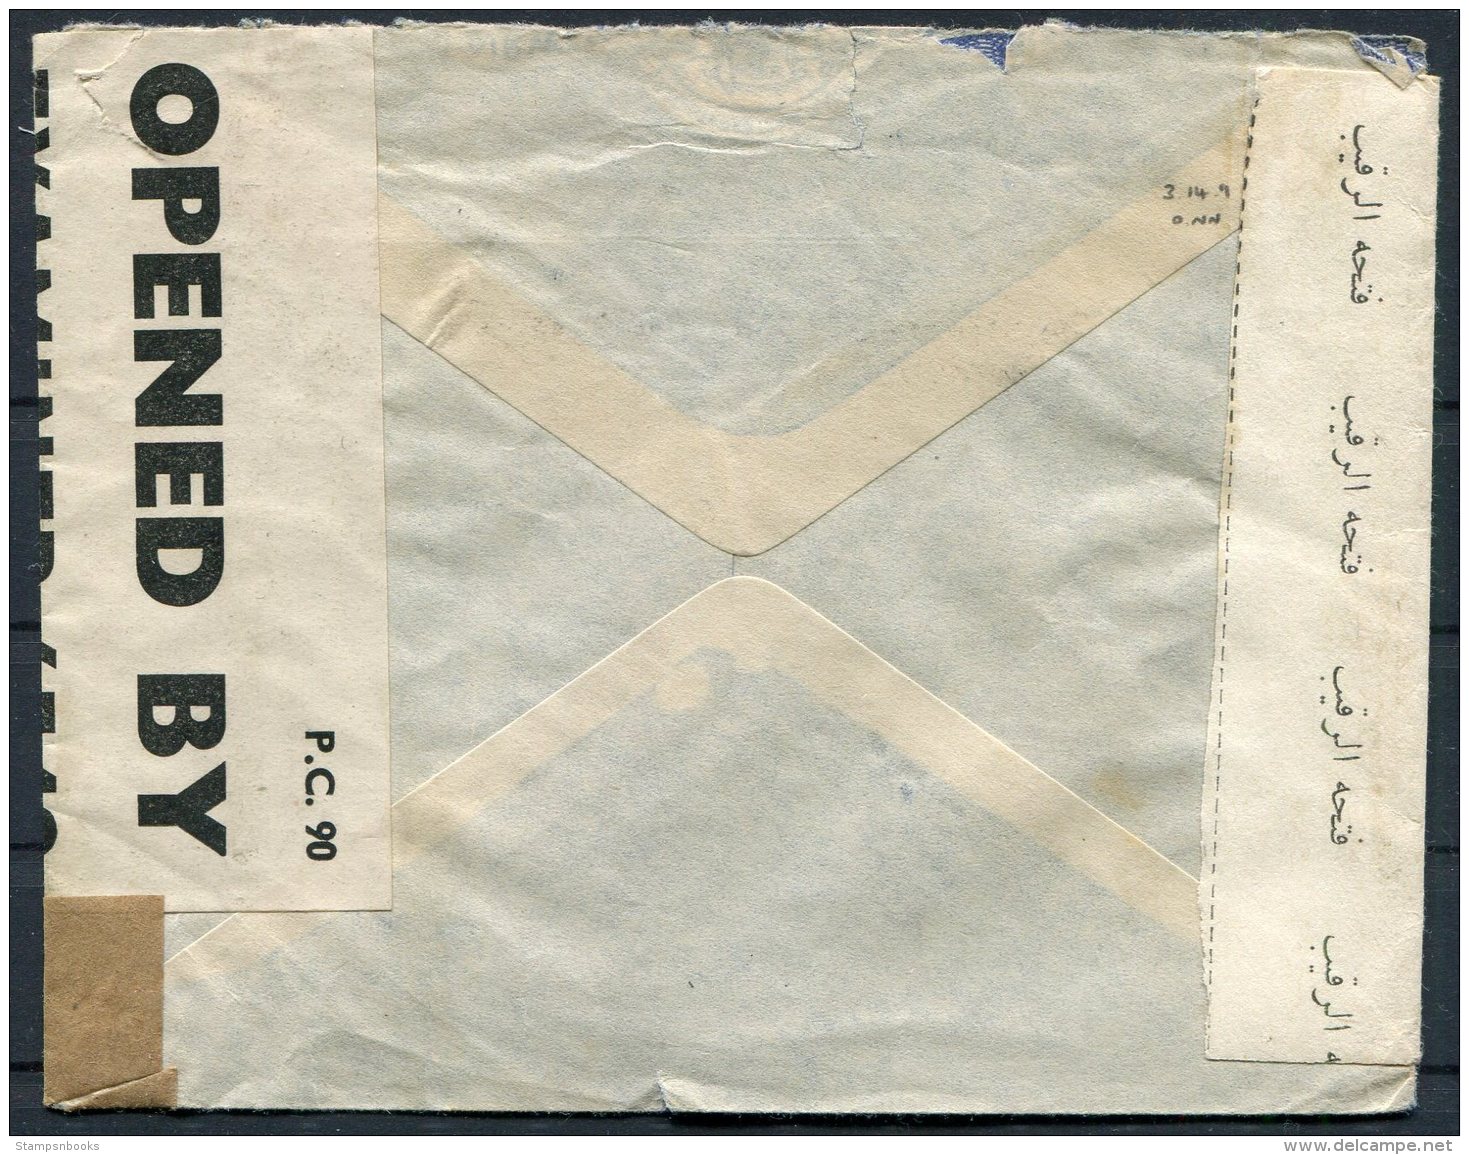 1941 Iraq Faiha Trading Corp Censor Airmail Cover - Hatch End, Middlesex, England - Irak